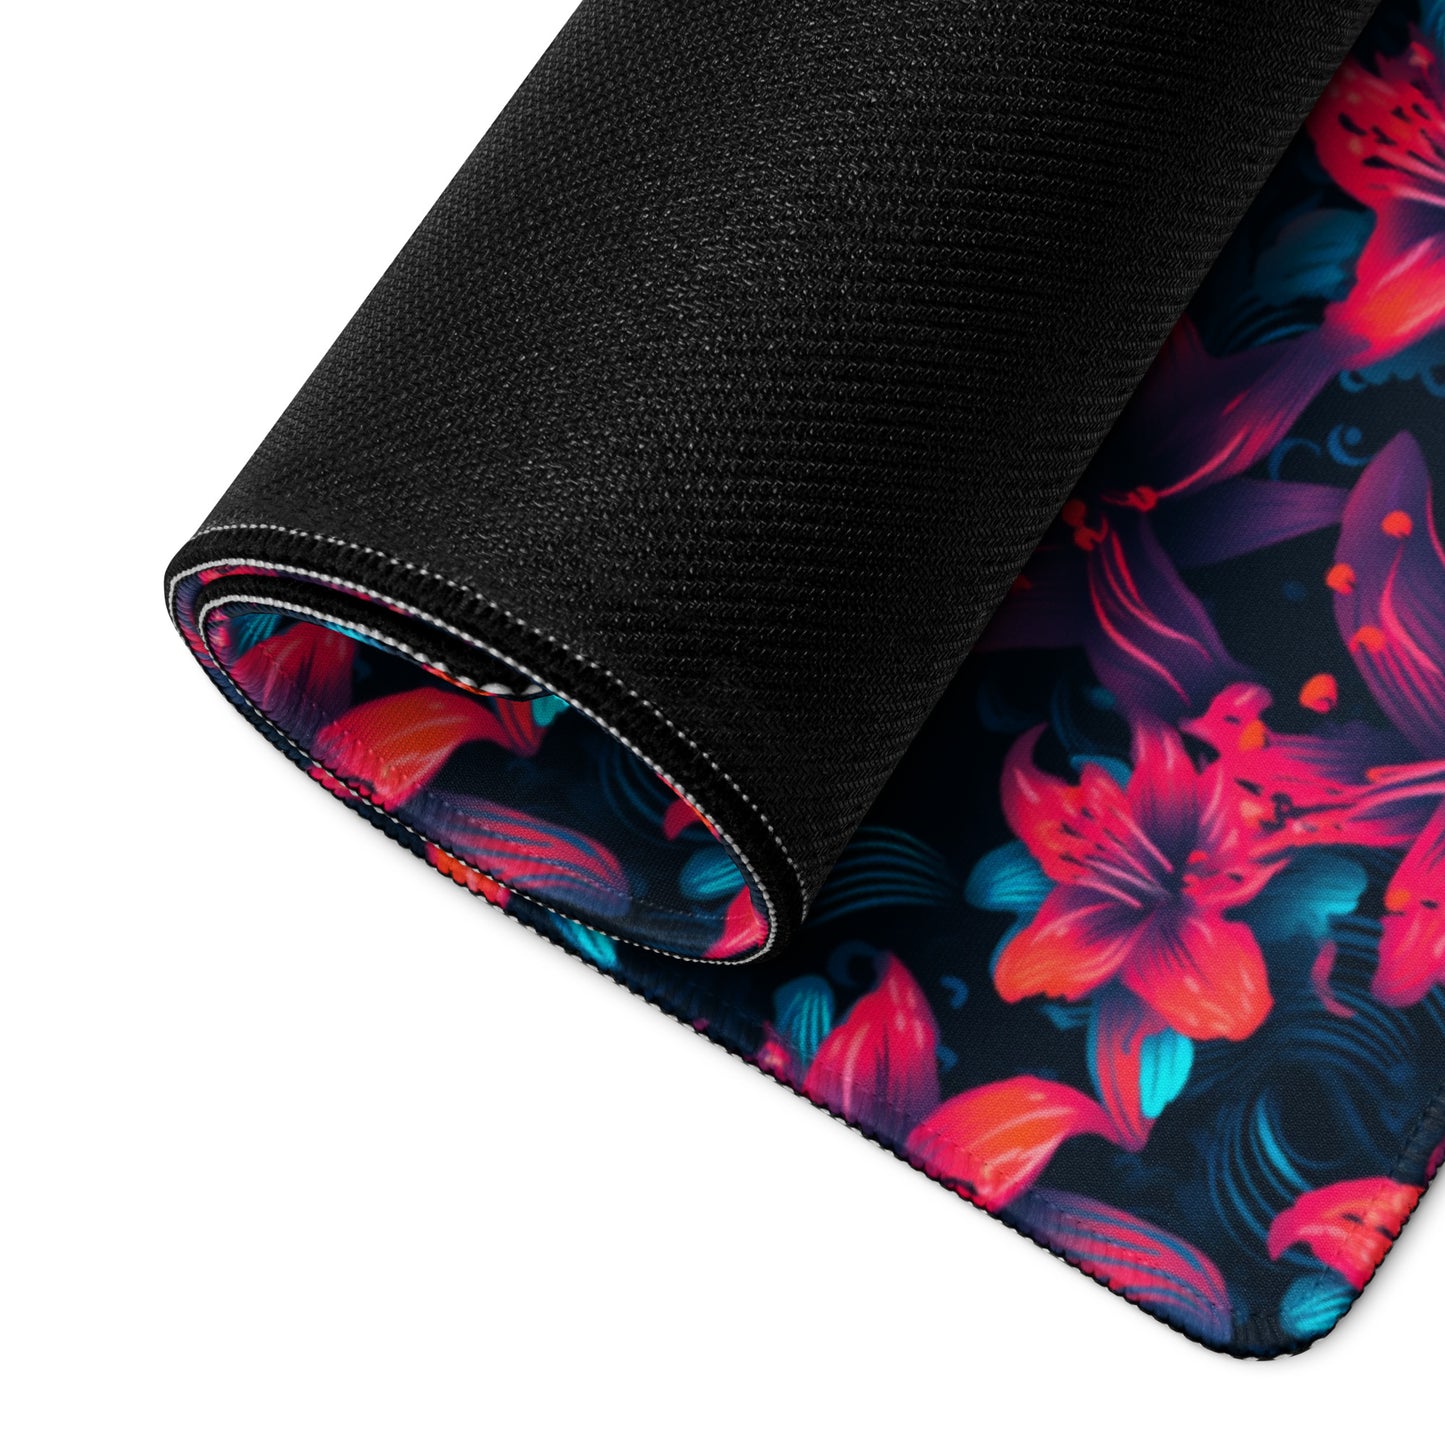 A 36" x 18" desk pad with a neon red and blue floral pattern rolled up.